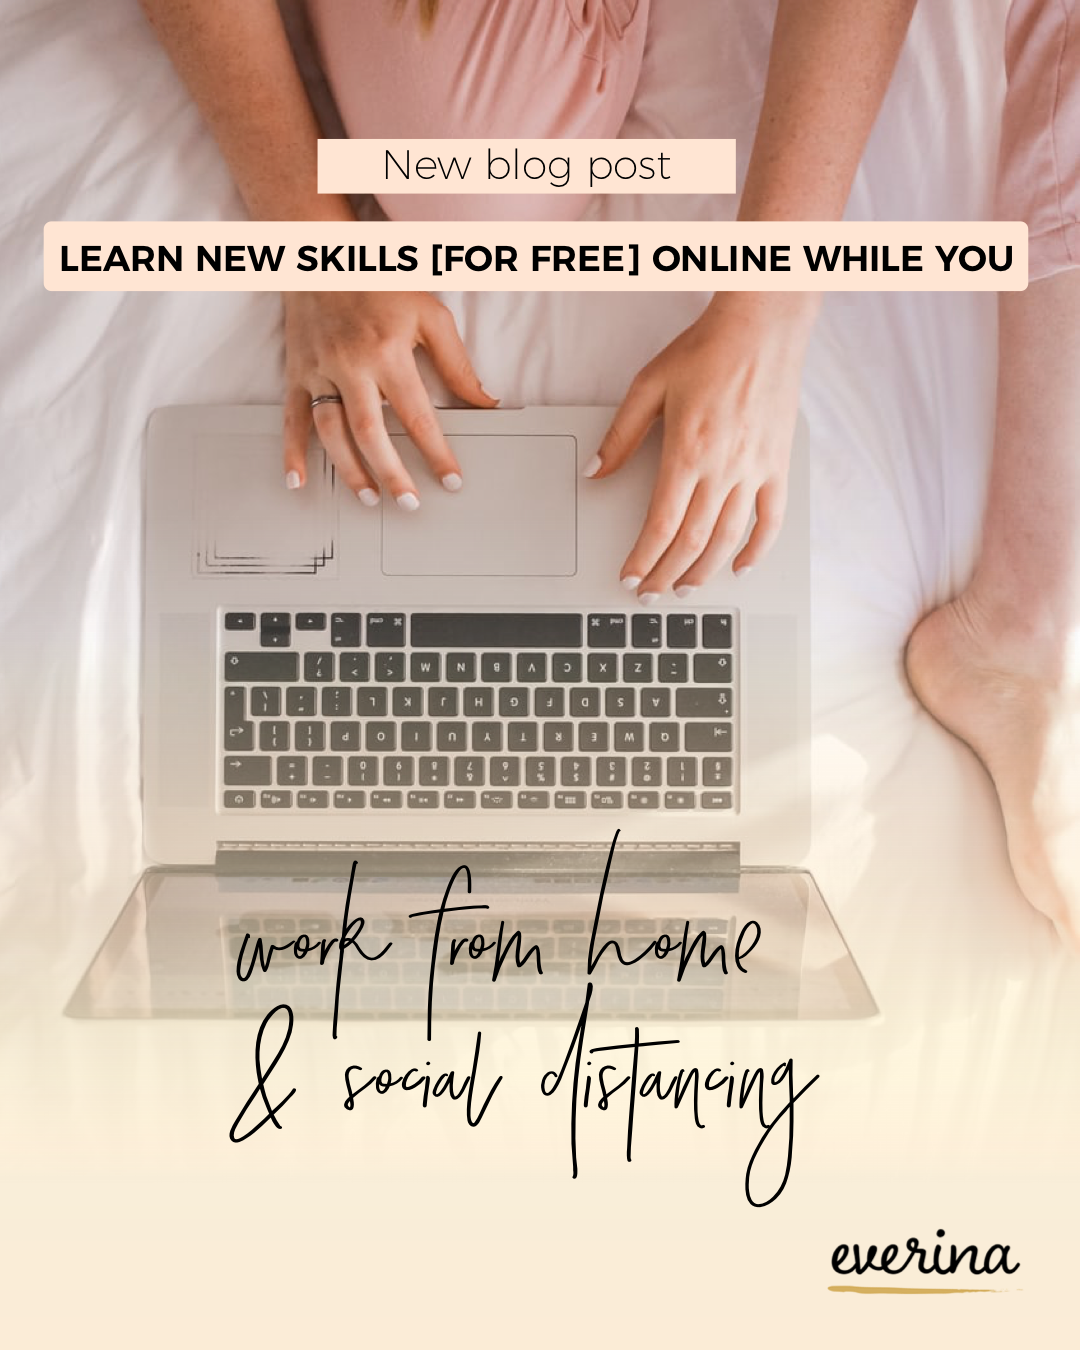 Learn New Skills Online [for FREE] While You Work From Home & Social Distancing ♡